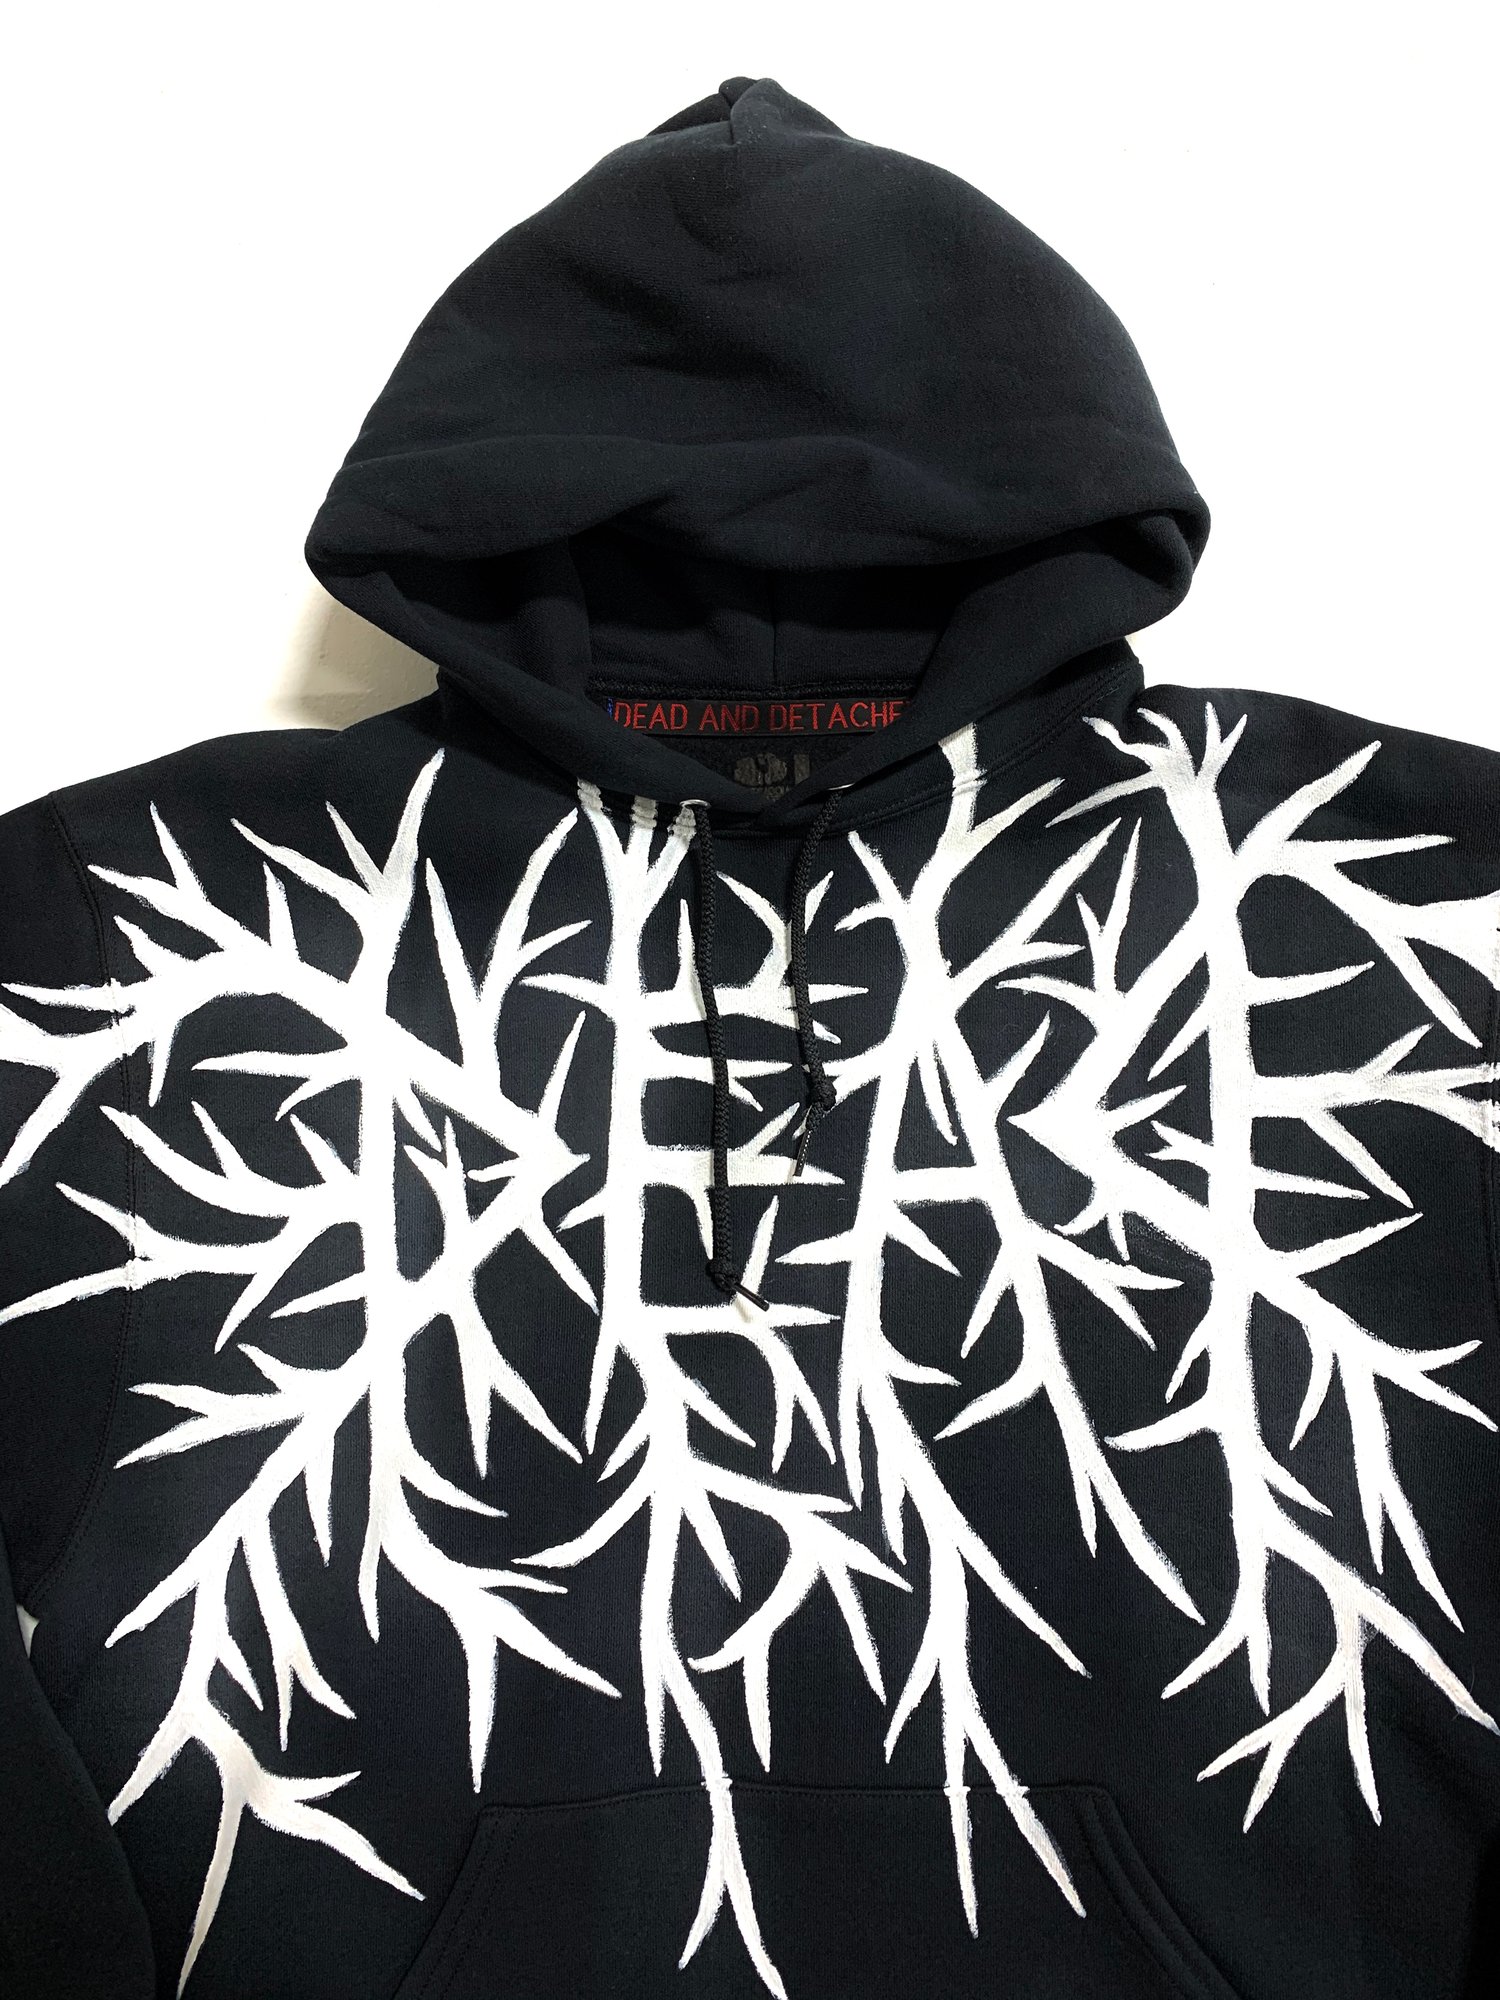 Image of DEAD BRANCHES hand painted hoodie